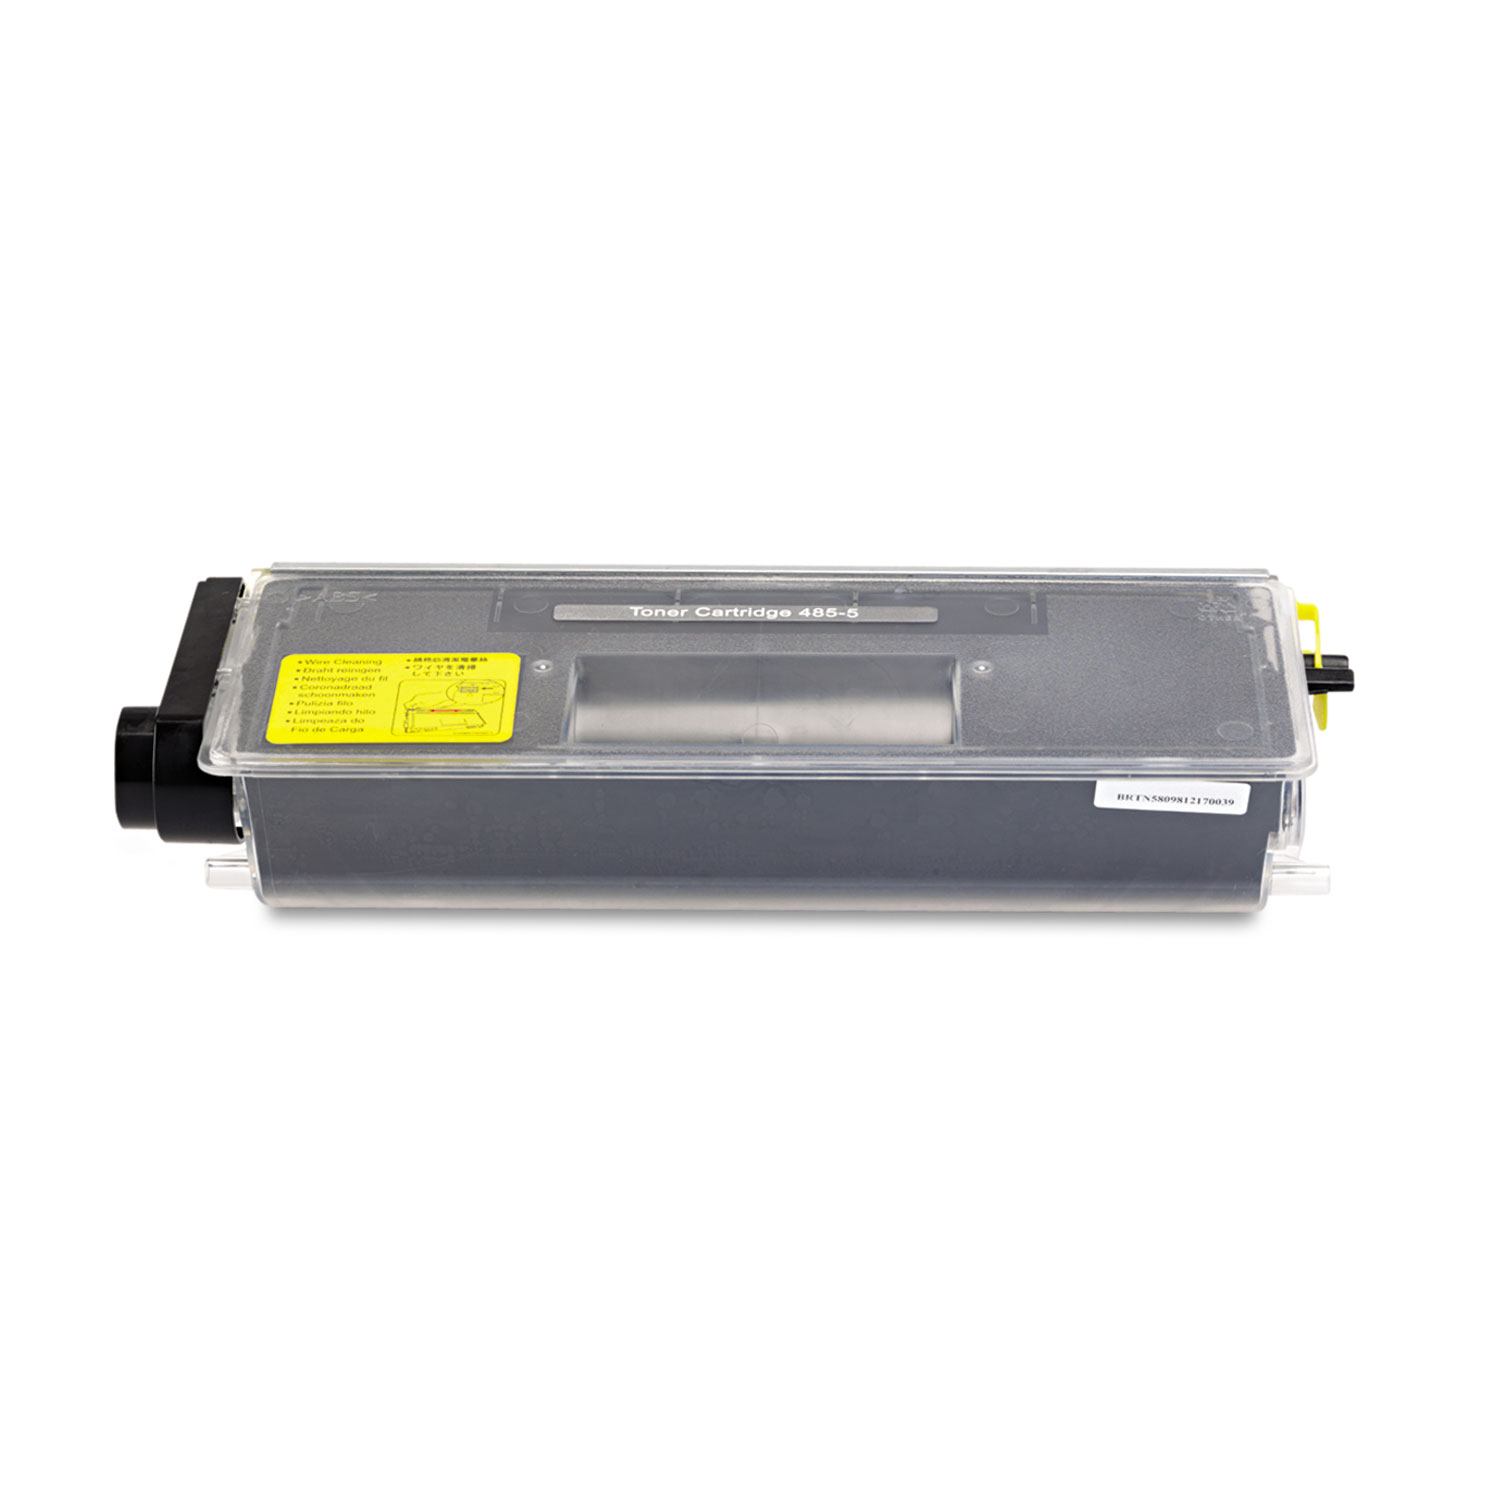 Pitney Bowes Remanufactured 4855 Toner, 7500 Page-yield, Black - image 1 of 7